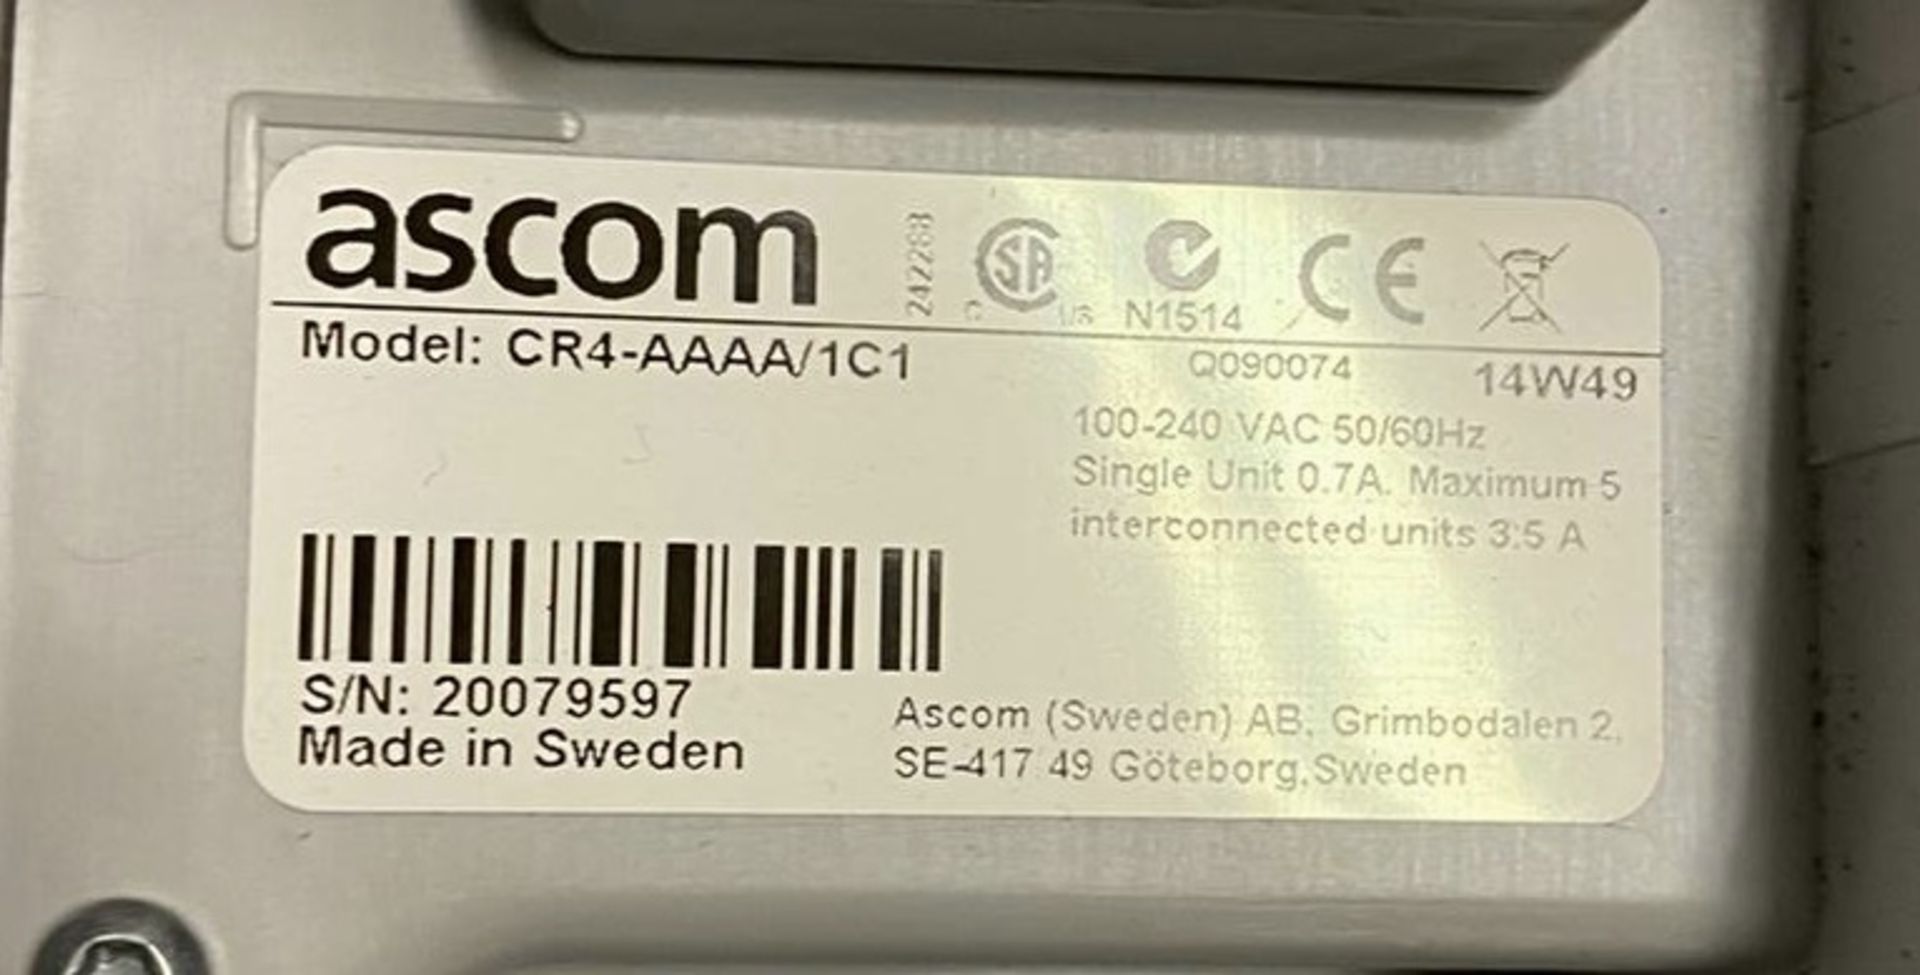 3 x Ascom Battery Pack Charger - Ref: CR4-AAAA - Used condition - Location: Altrincham WA14 - Image 3 of 4